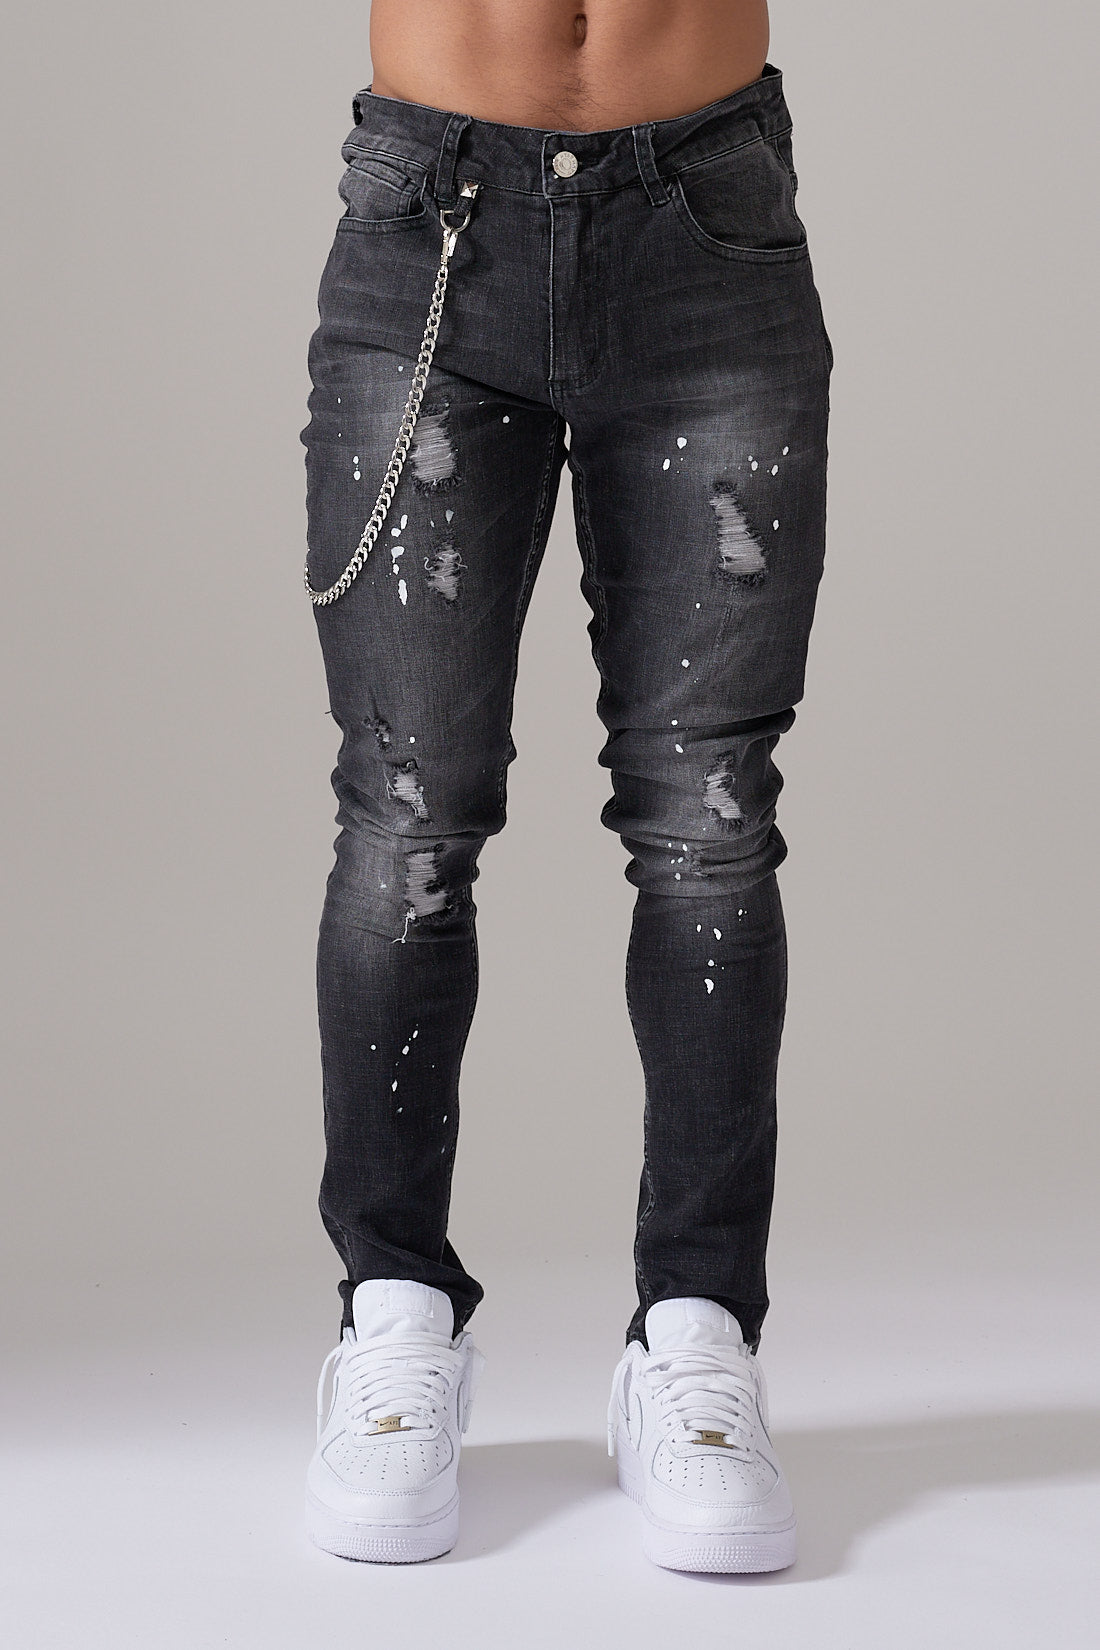 WASHED SPLASH PAINT GREY RIPPED DENIM JEANS WITH METAL PLAQUE